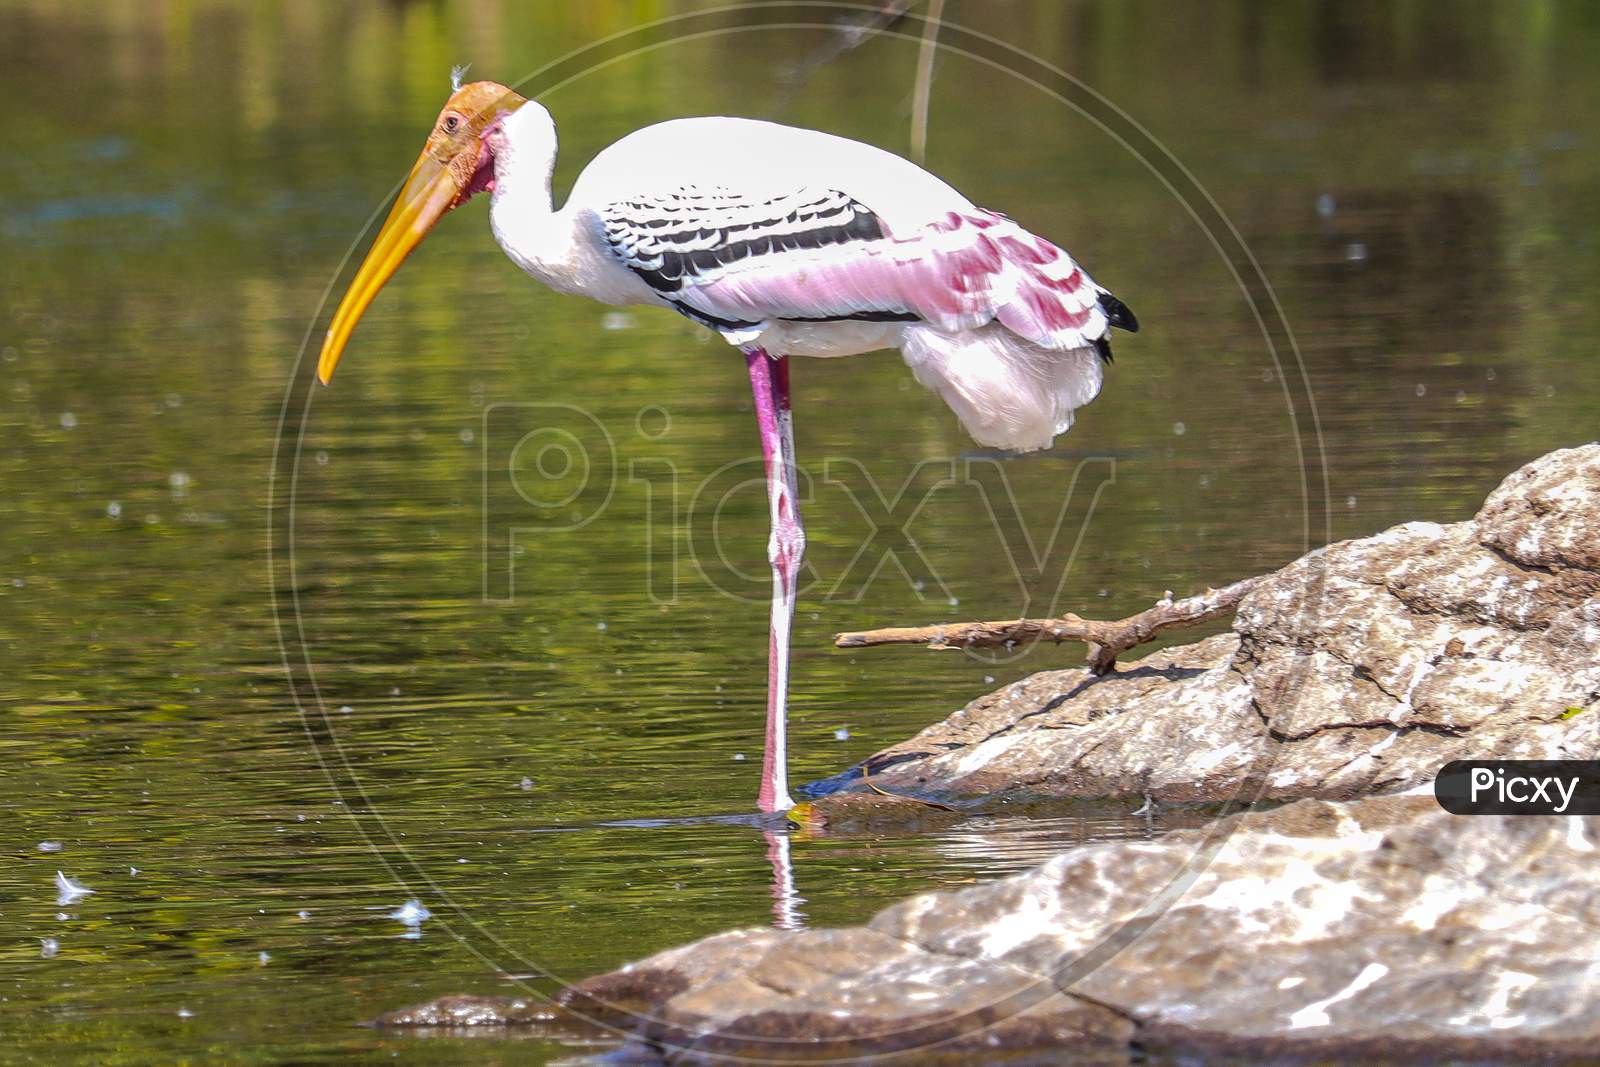 THIS IS A PHOTO OF Painted Stork